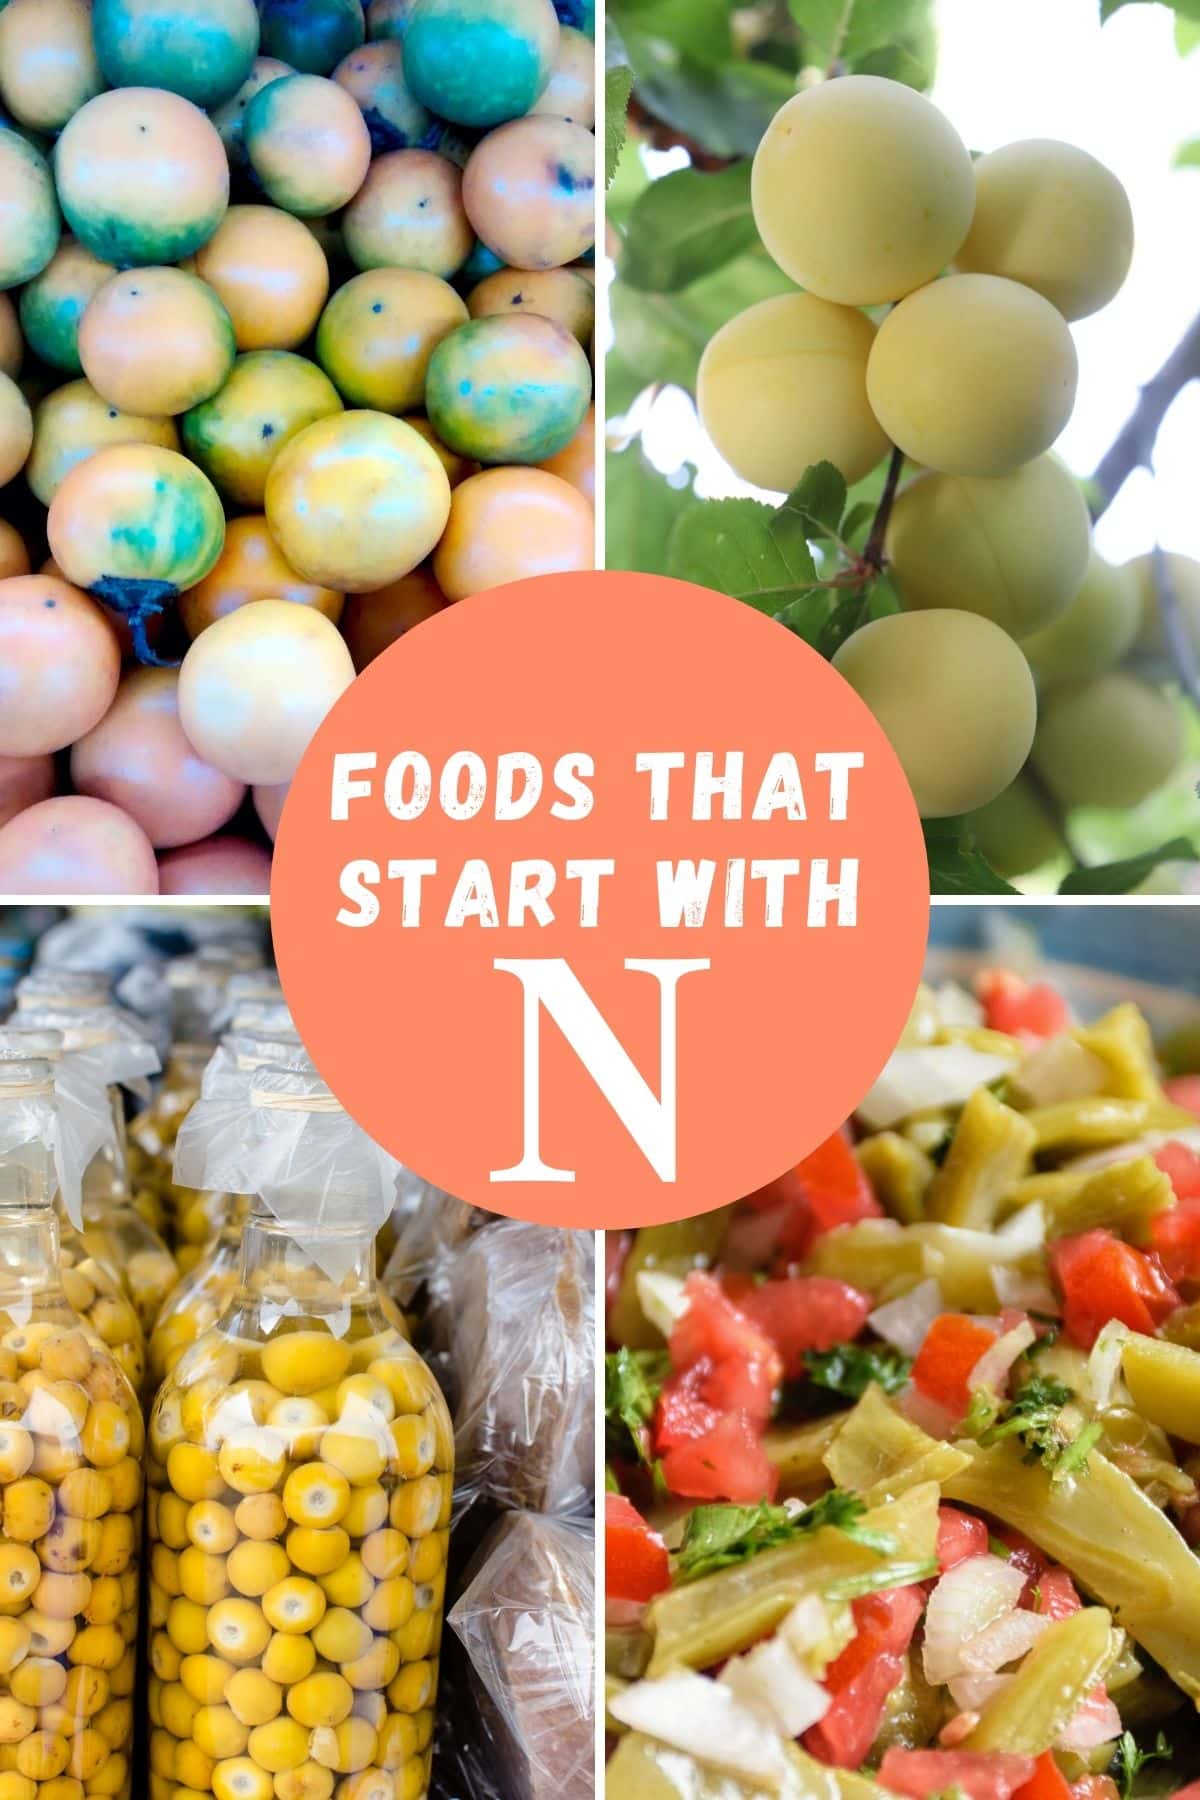 Foods starting with N